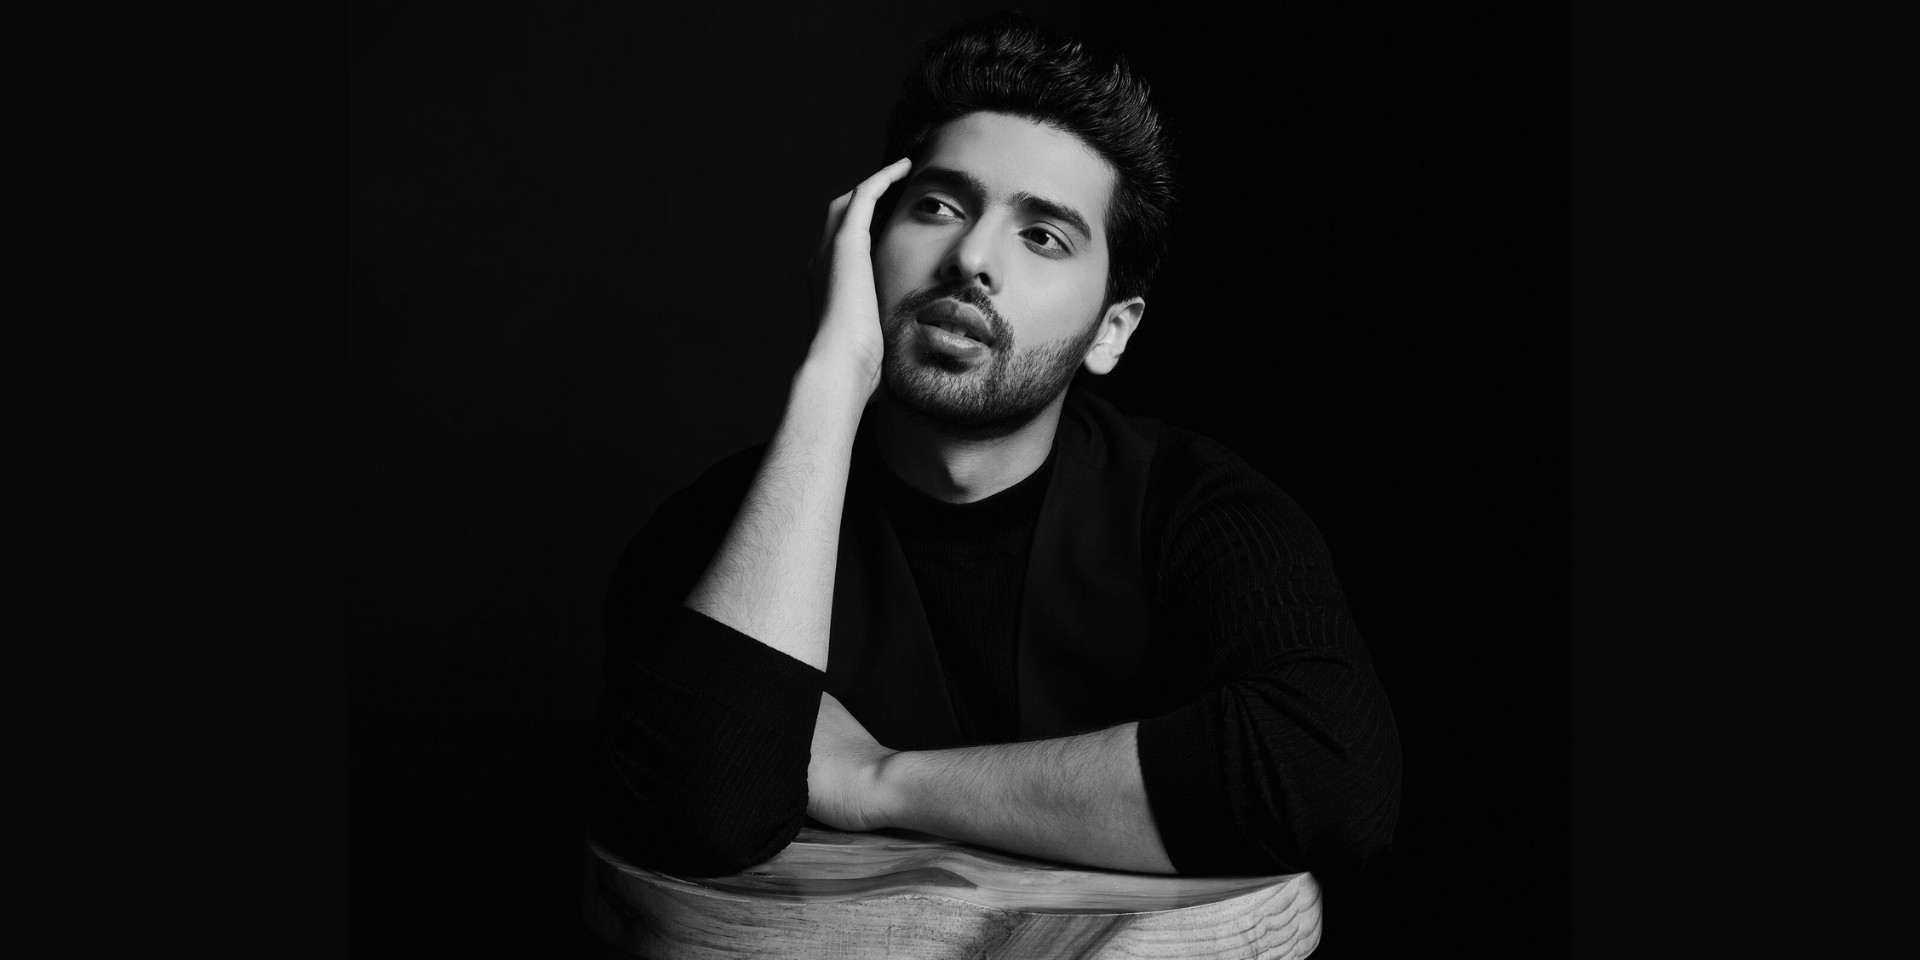 Armaan Malik on starting over again and bringing Indian music to the global stage: "I would love to give people a taste of what Indian artists can offer."